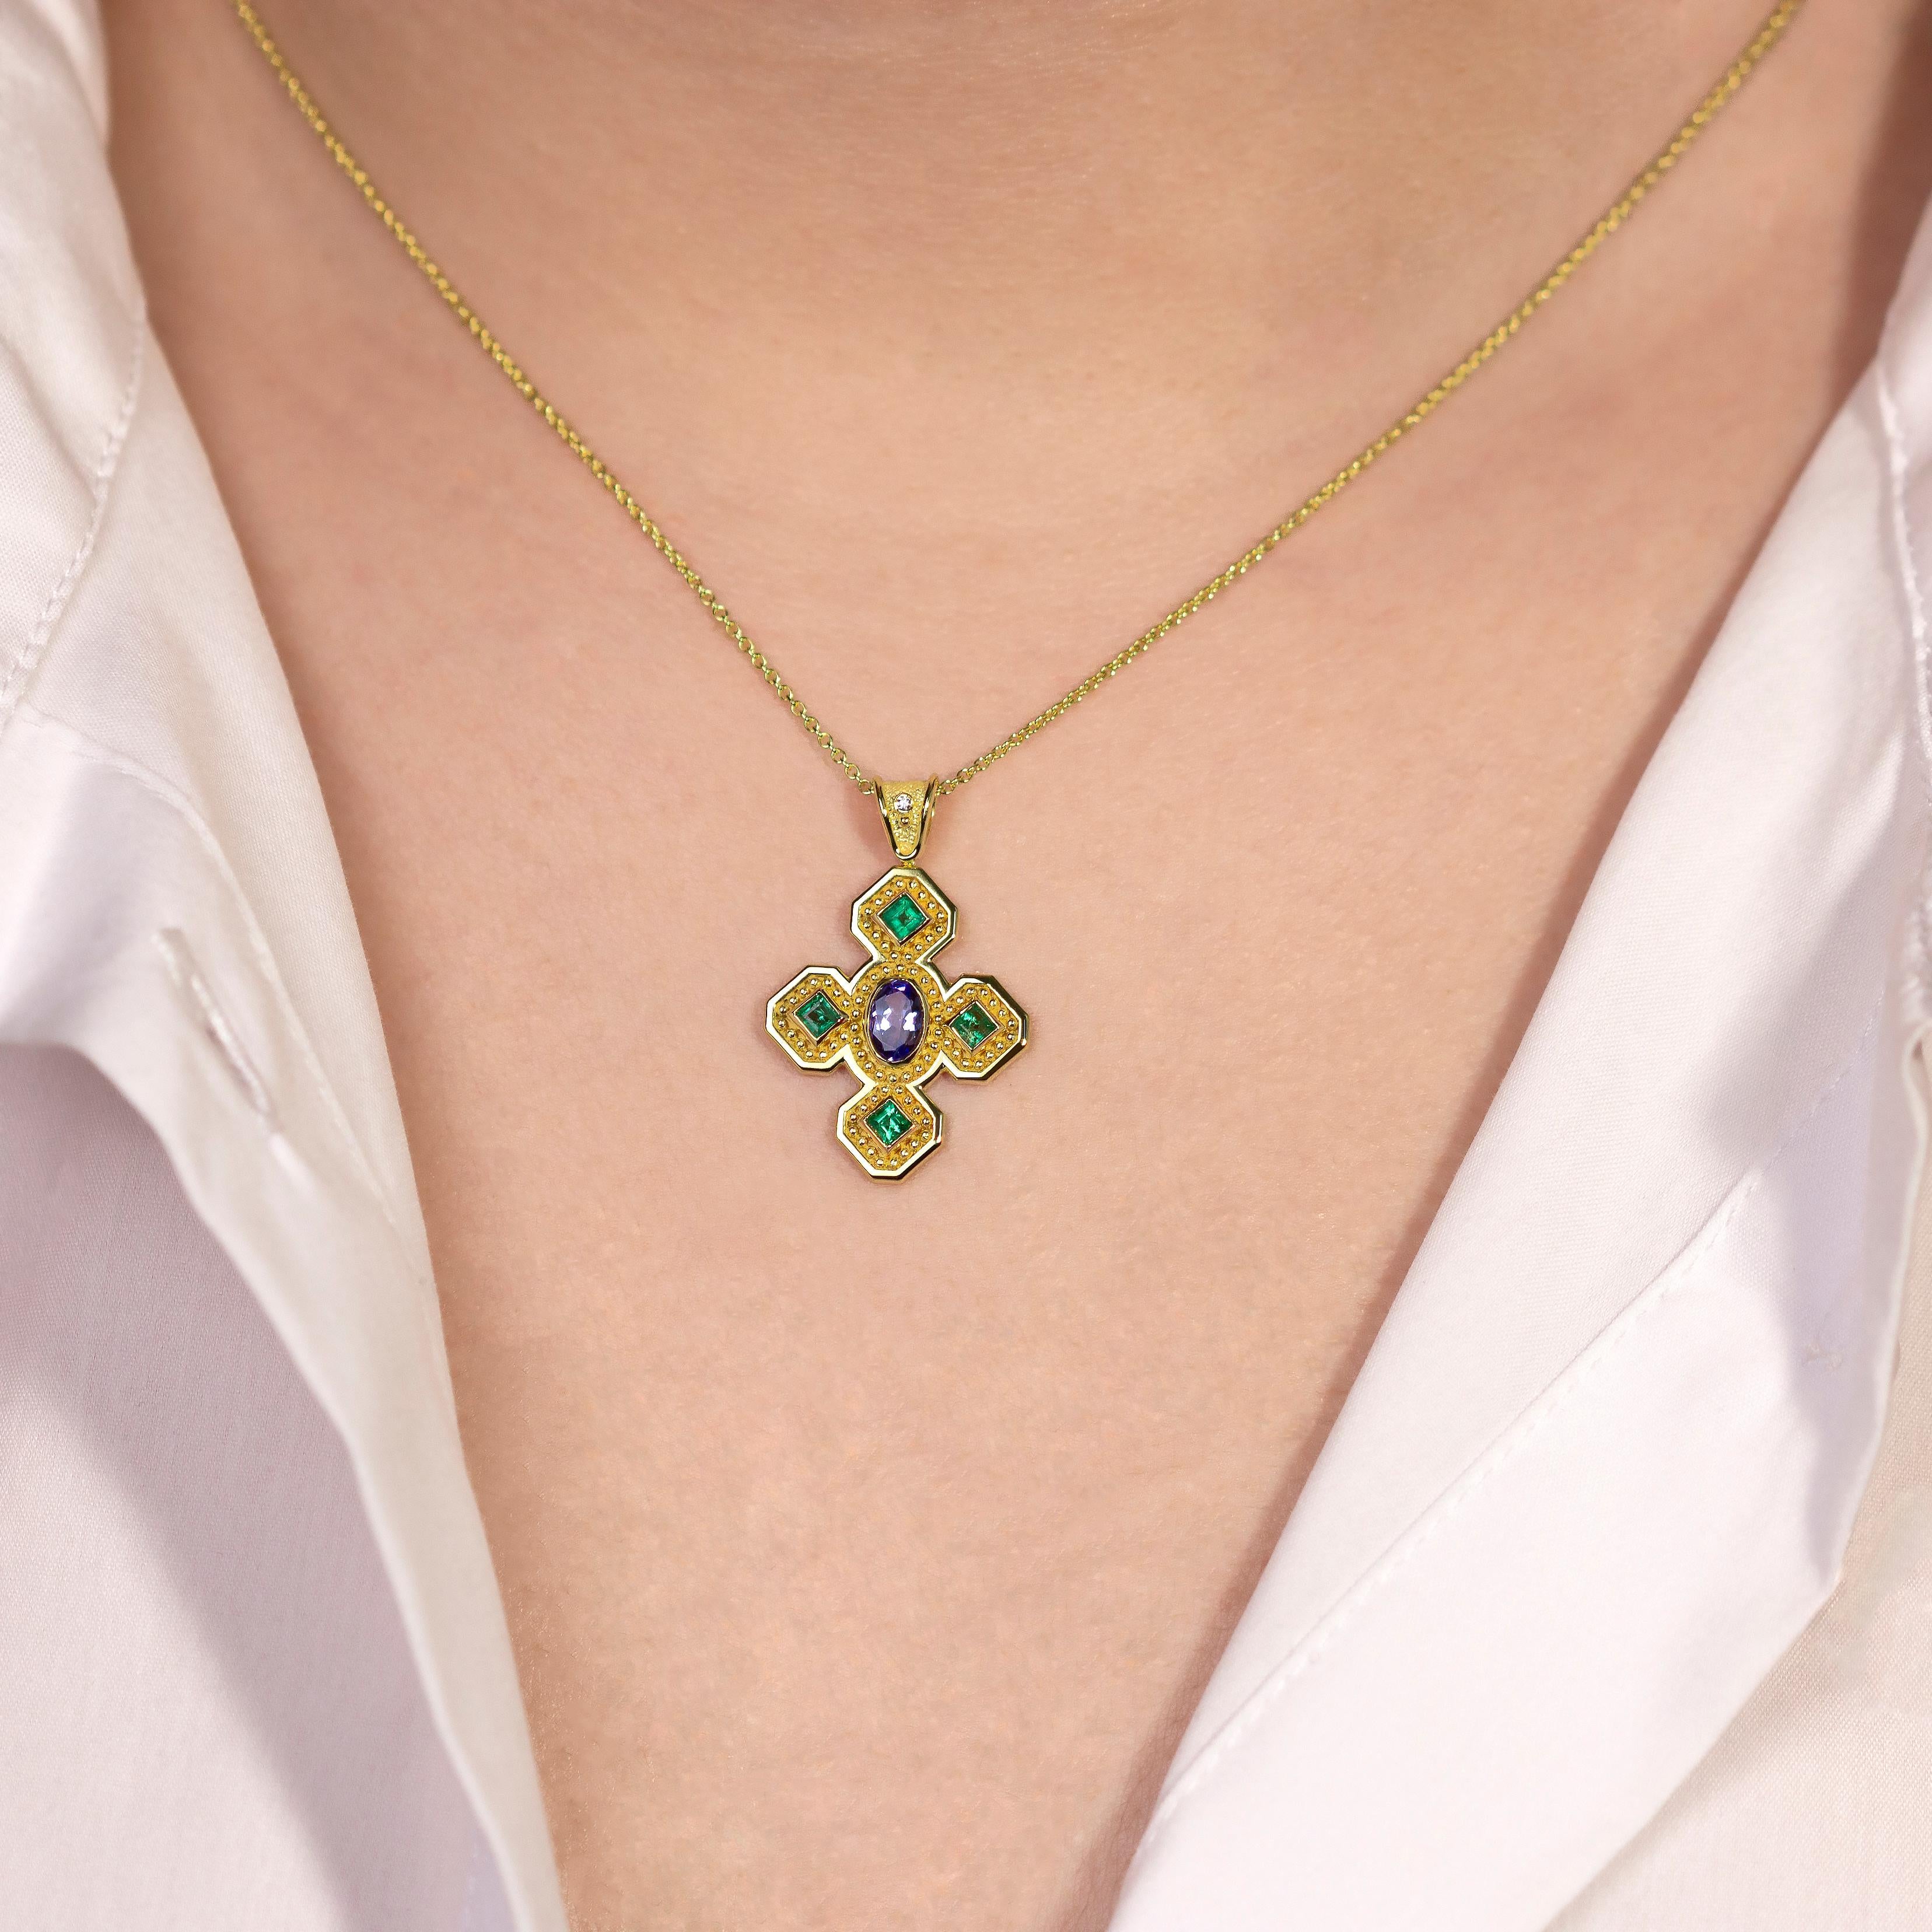 Experience the divine beauty of this Byzantine cross pendant, adorned with exquisite emeralds, tanzanite, and a radiant diamond. This piece is a testament to the rich history and opulence of Byzantine artistry, making it a true masterpiece of your